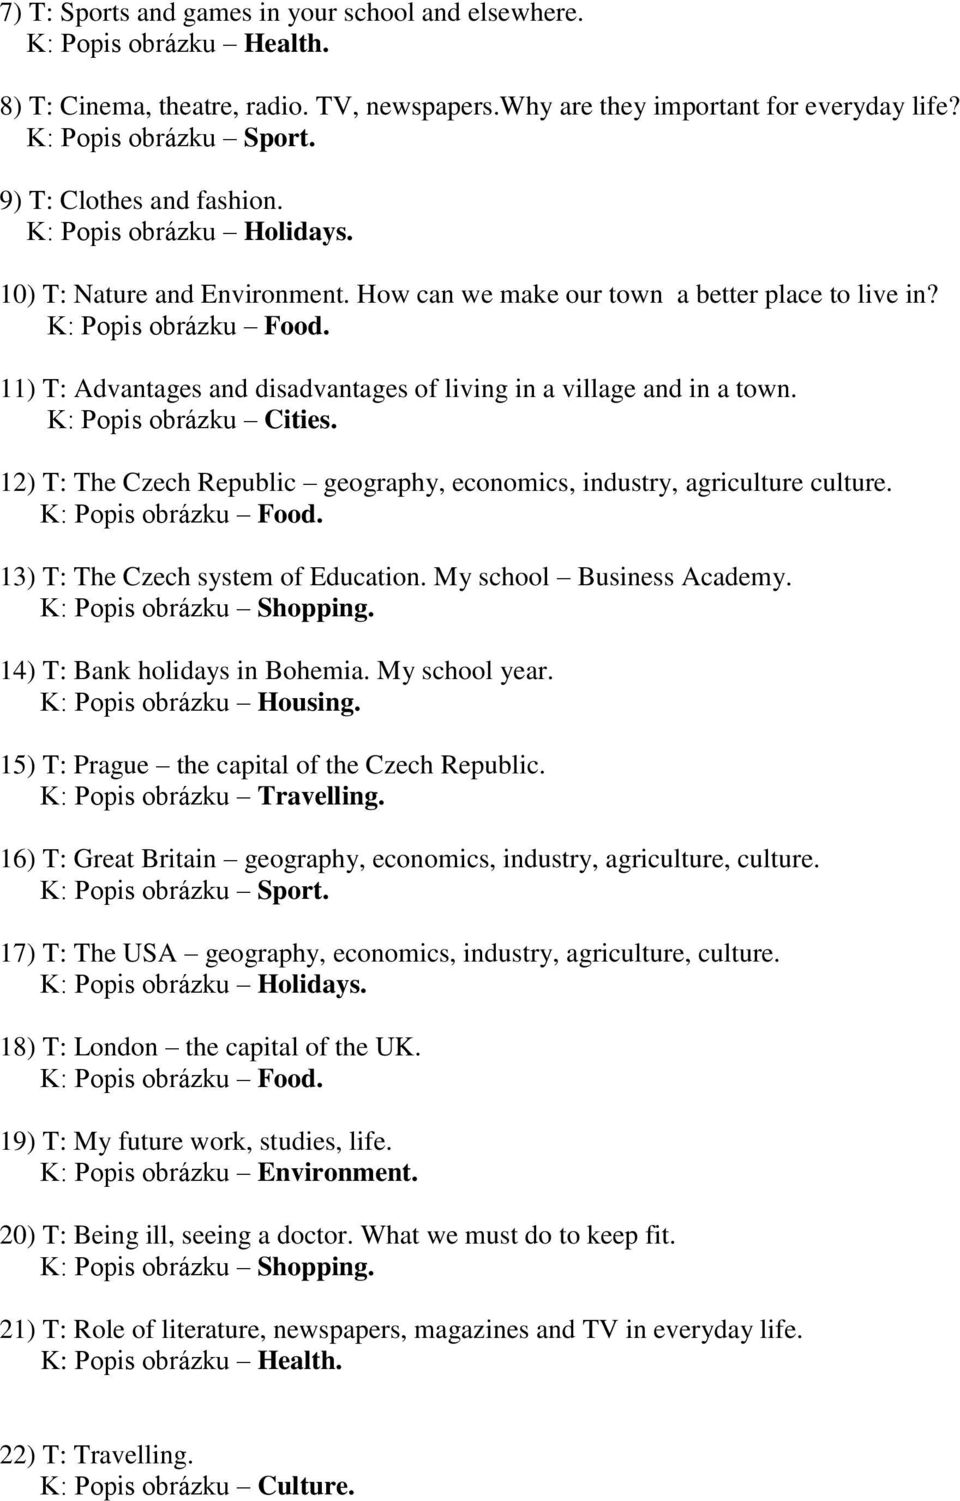 11) T: Advantages and disadvantages of living in a village and in a town. K: Popis obrázku Cities. 12) T: The Czech Republic geography, economics, industry, agriculture culture. K: Popis obrázku Food.